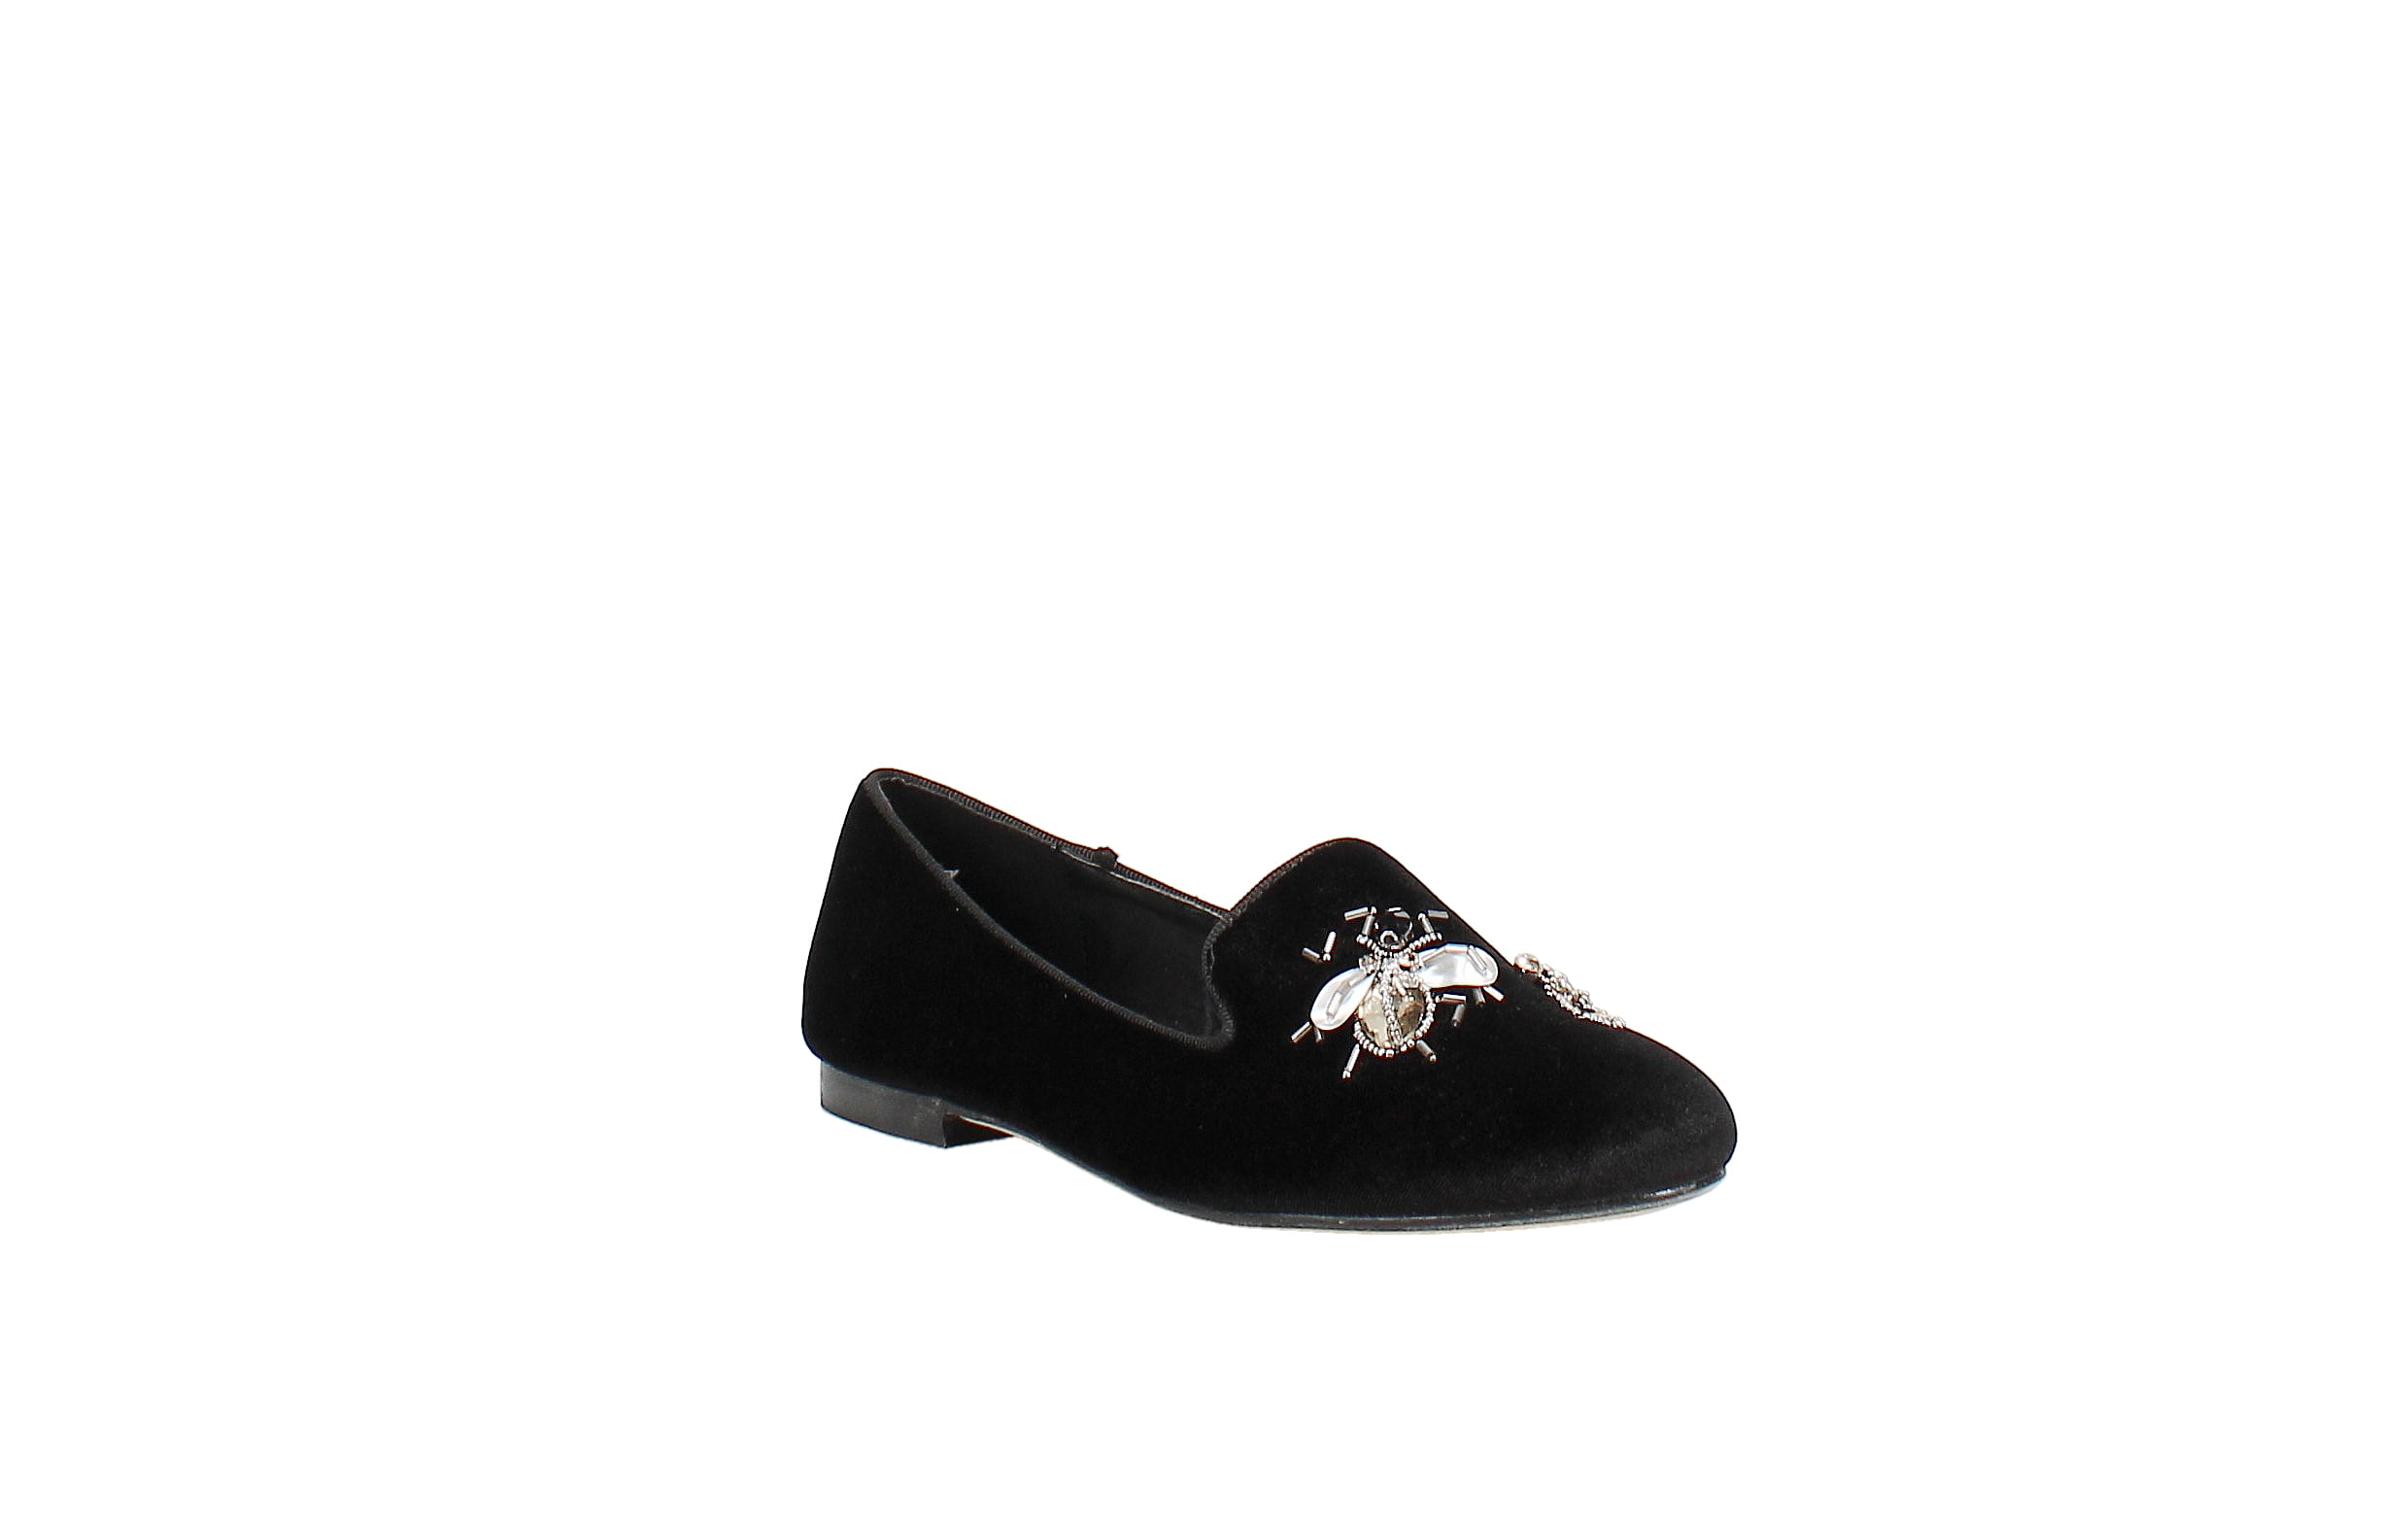 SheSole Women's Flats Velvet Loafers with Chain Decoration Casual Slip On Driving Shoes Black